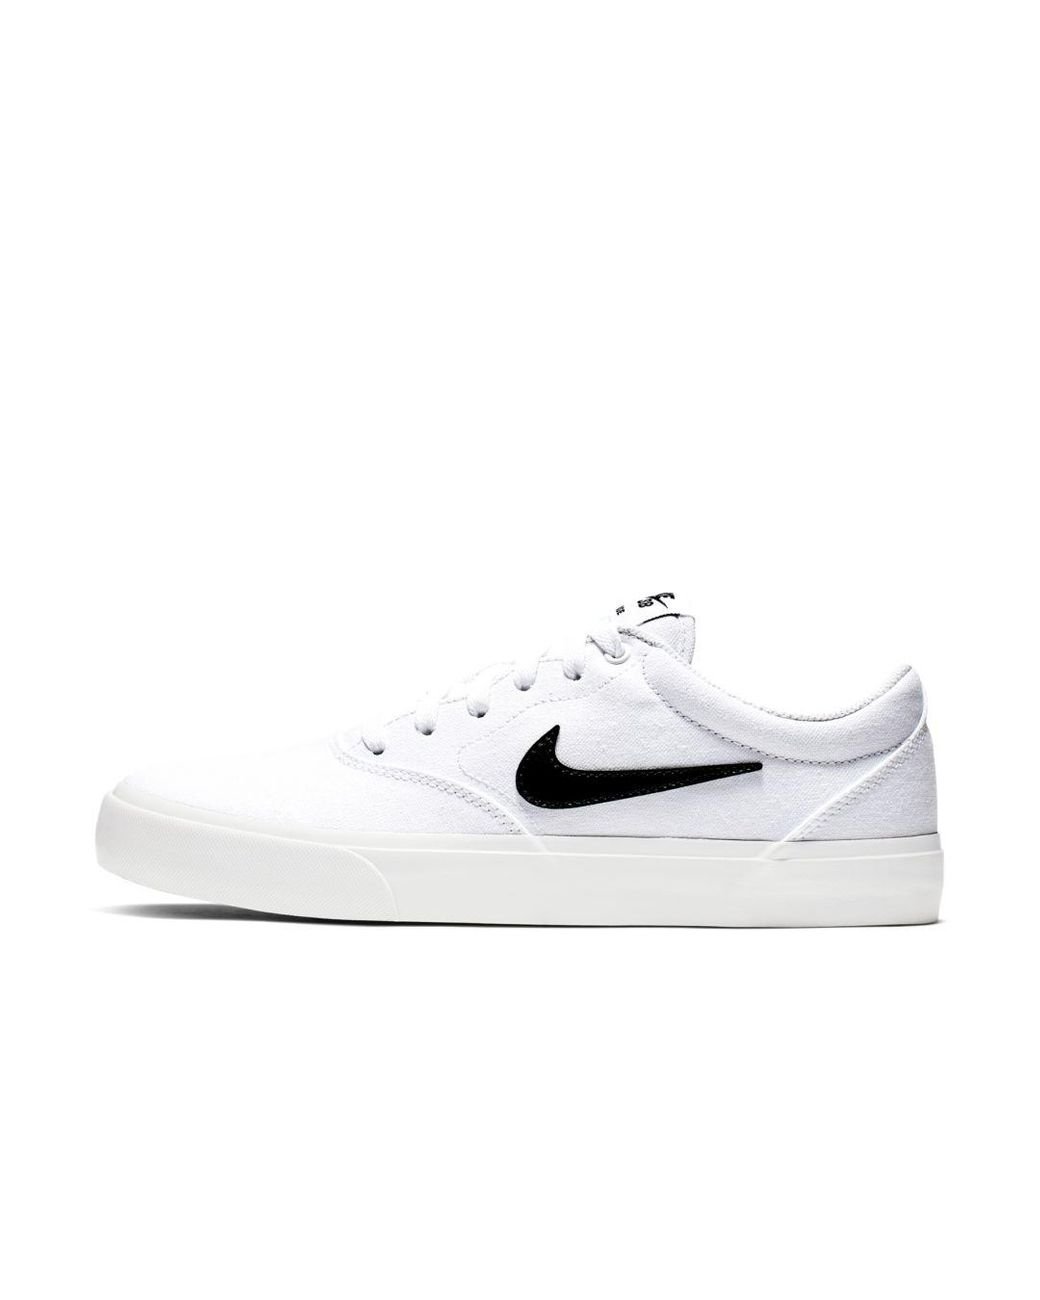 Nike Sb Charge Canvas Skate Shoe in White | Lyst